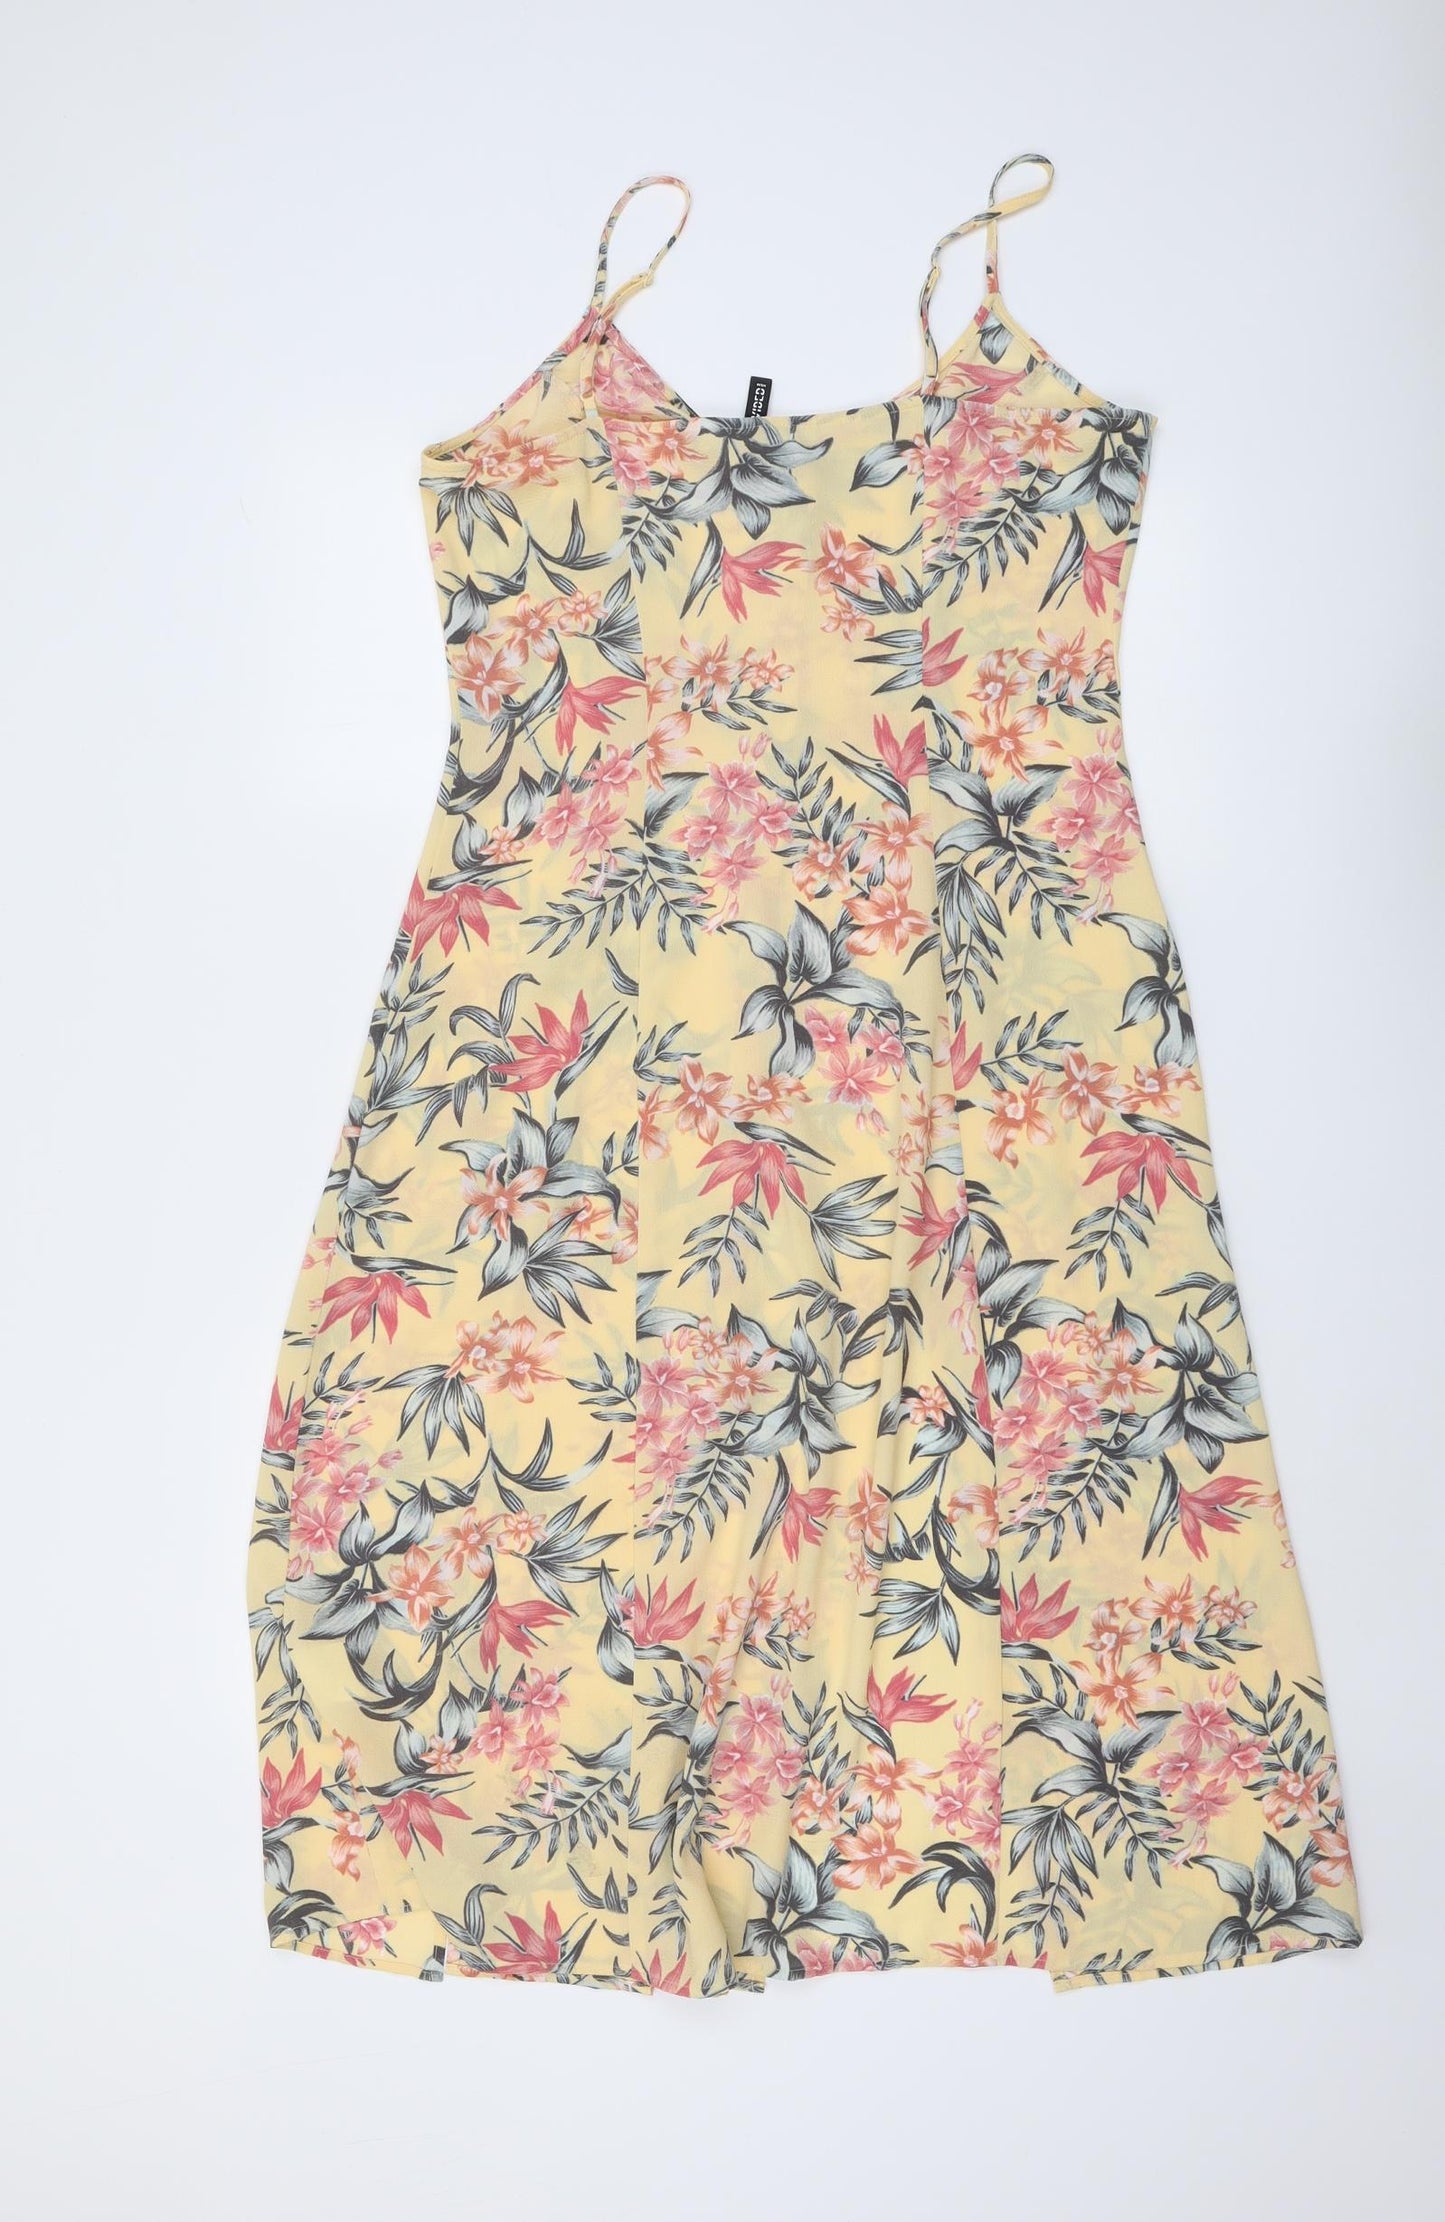 H&M Womens Yellow Floral Polyester Slip Dress Size 14 V-Neck Button